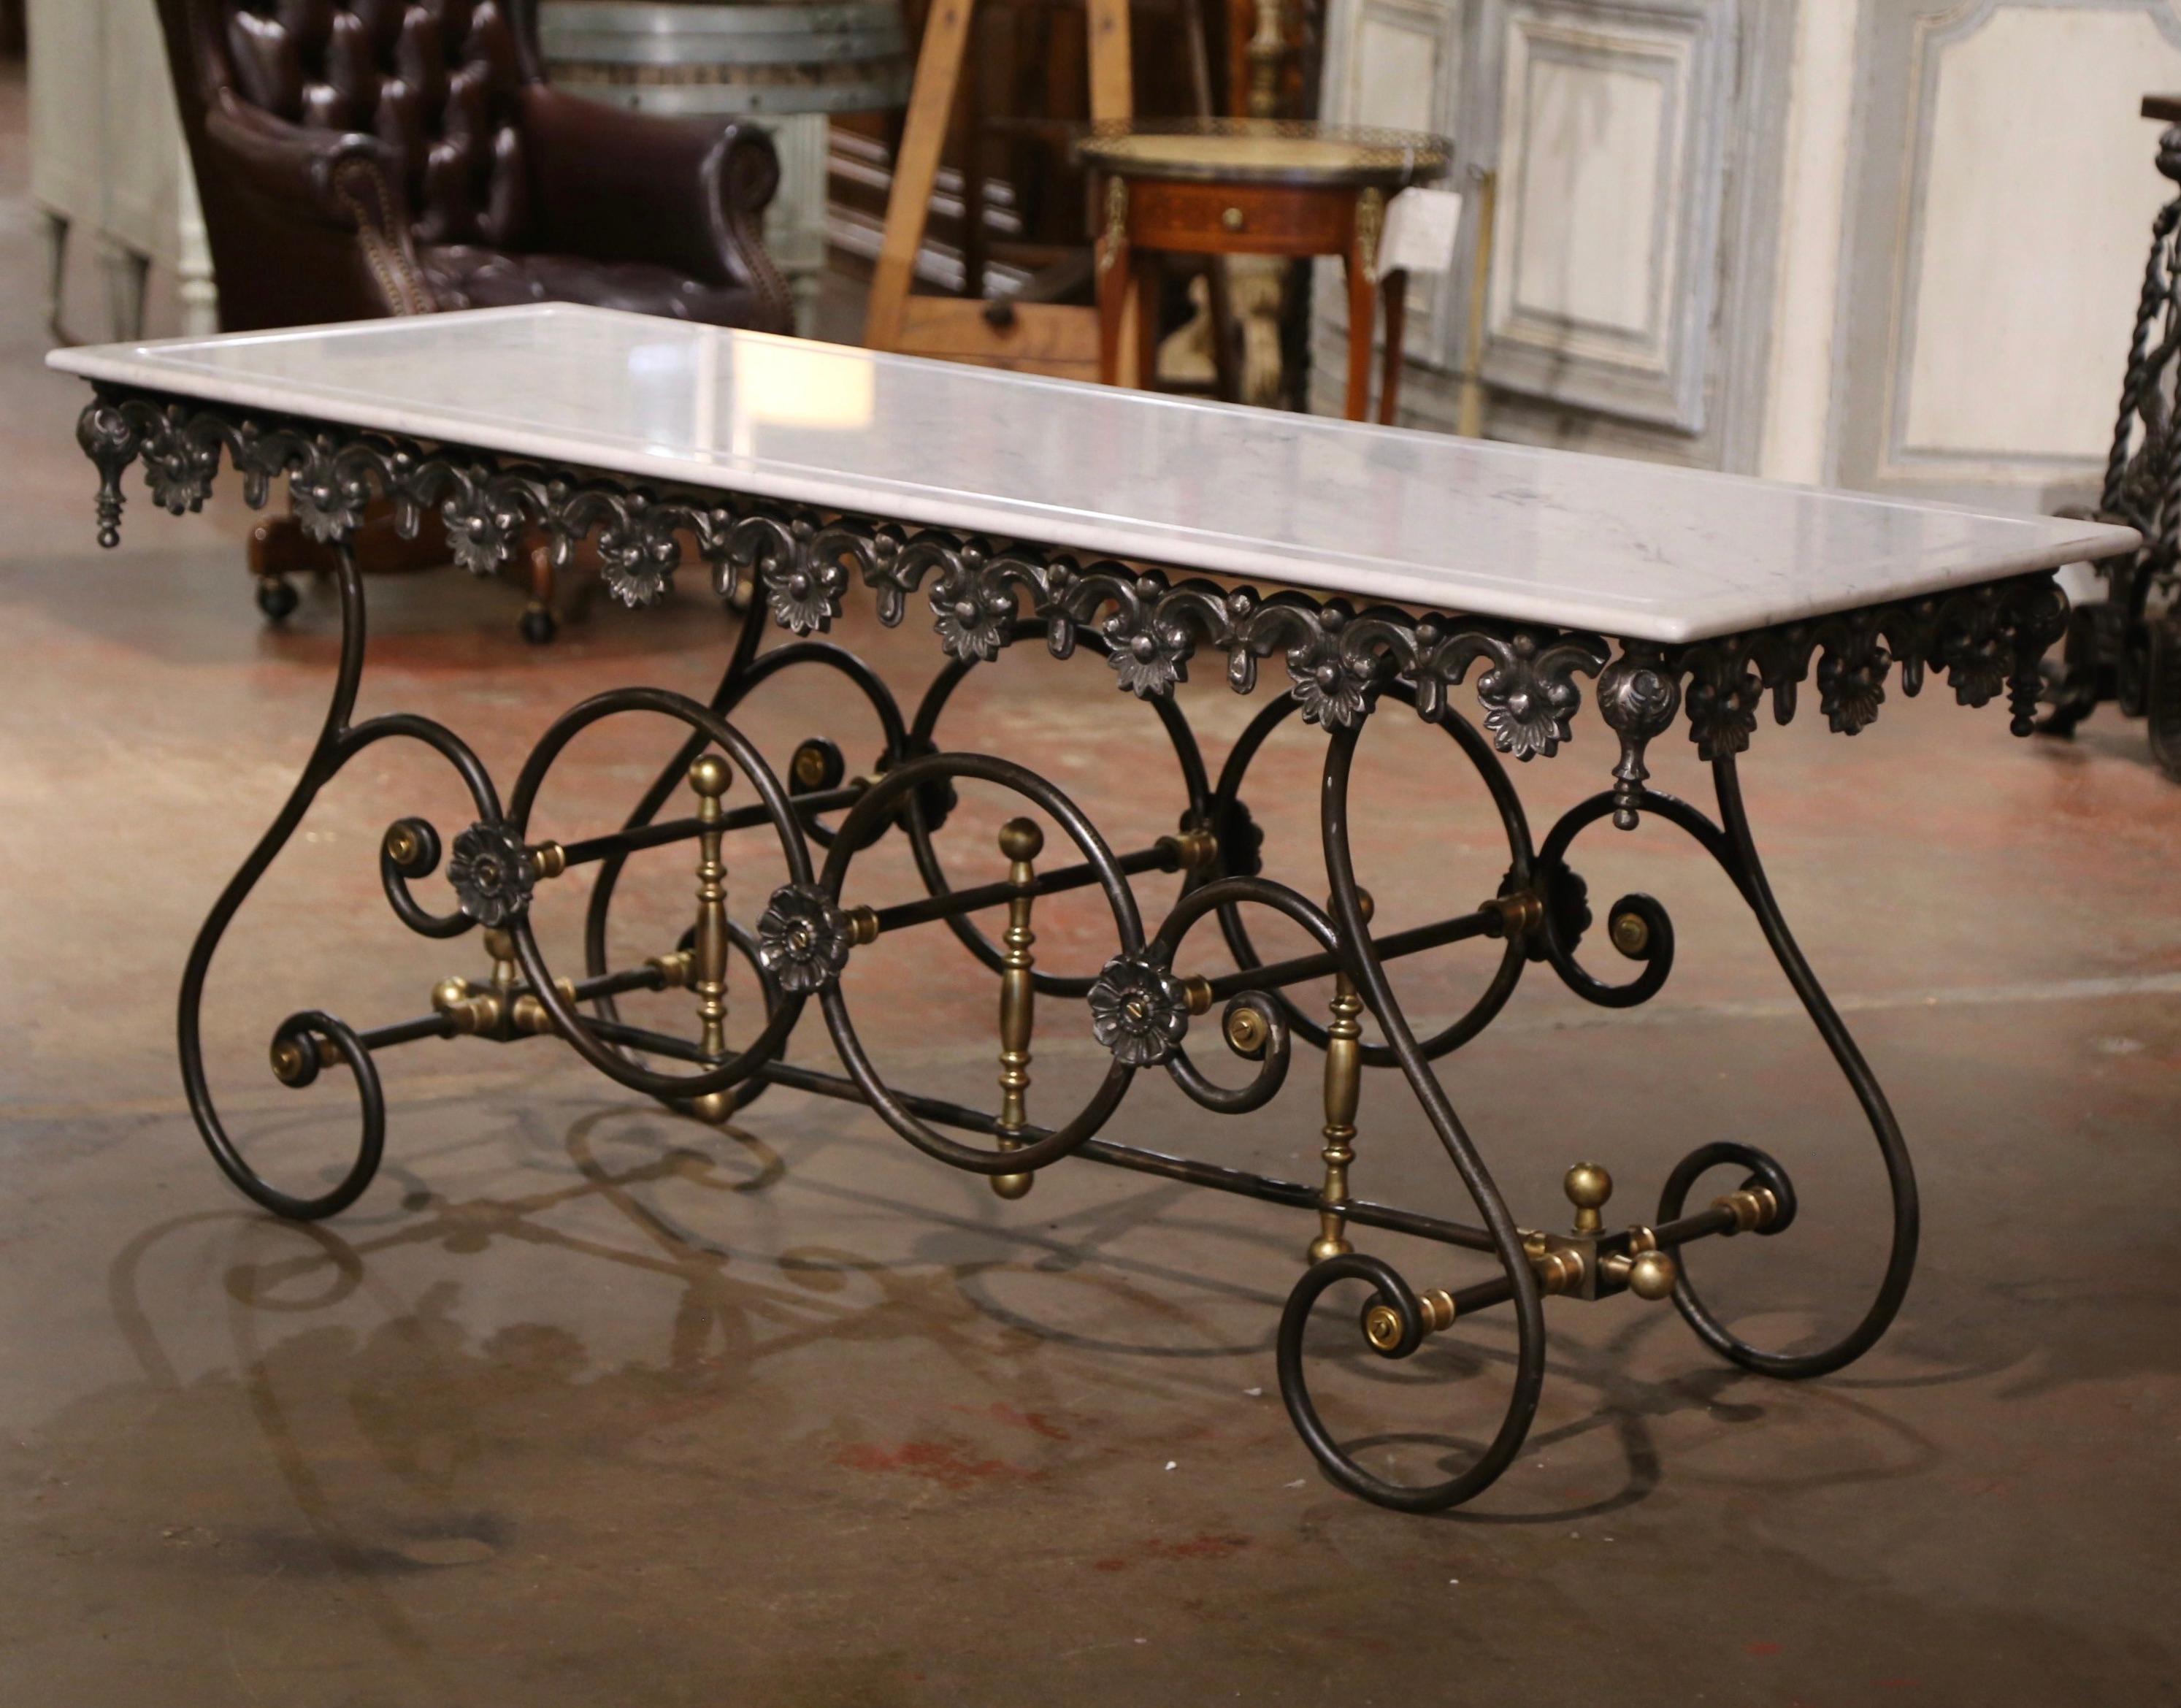 This large French pastry table would add the ideal amount of surface space to any kitchen. The 